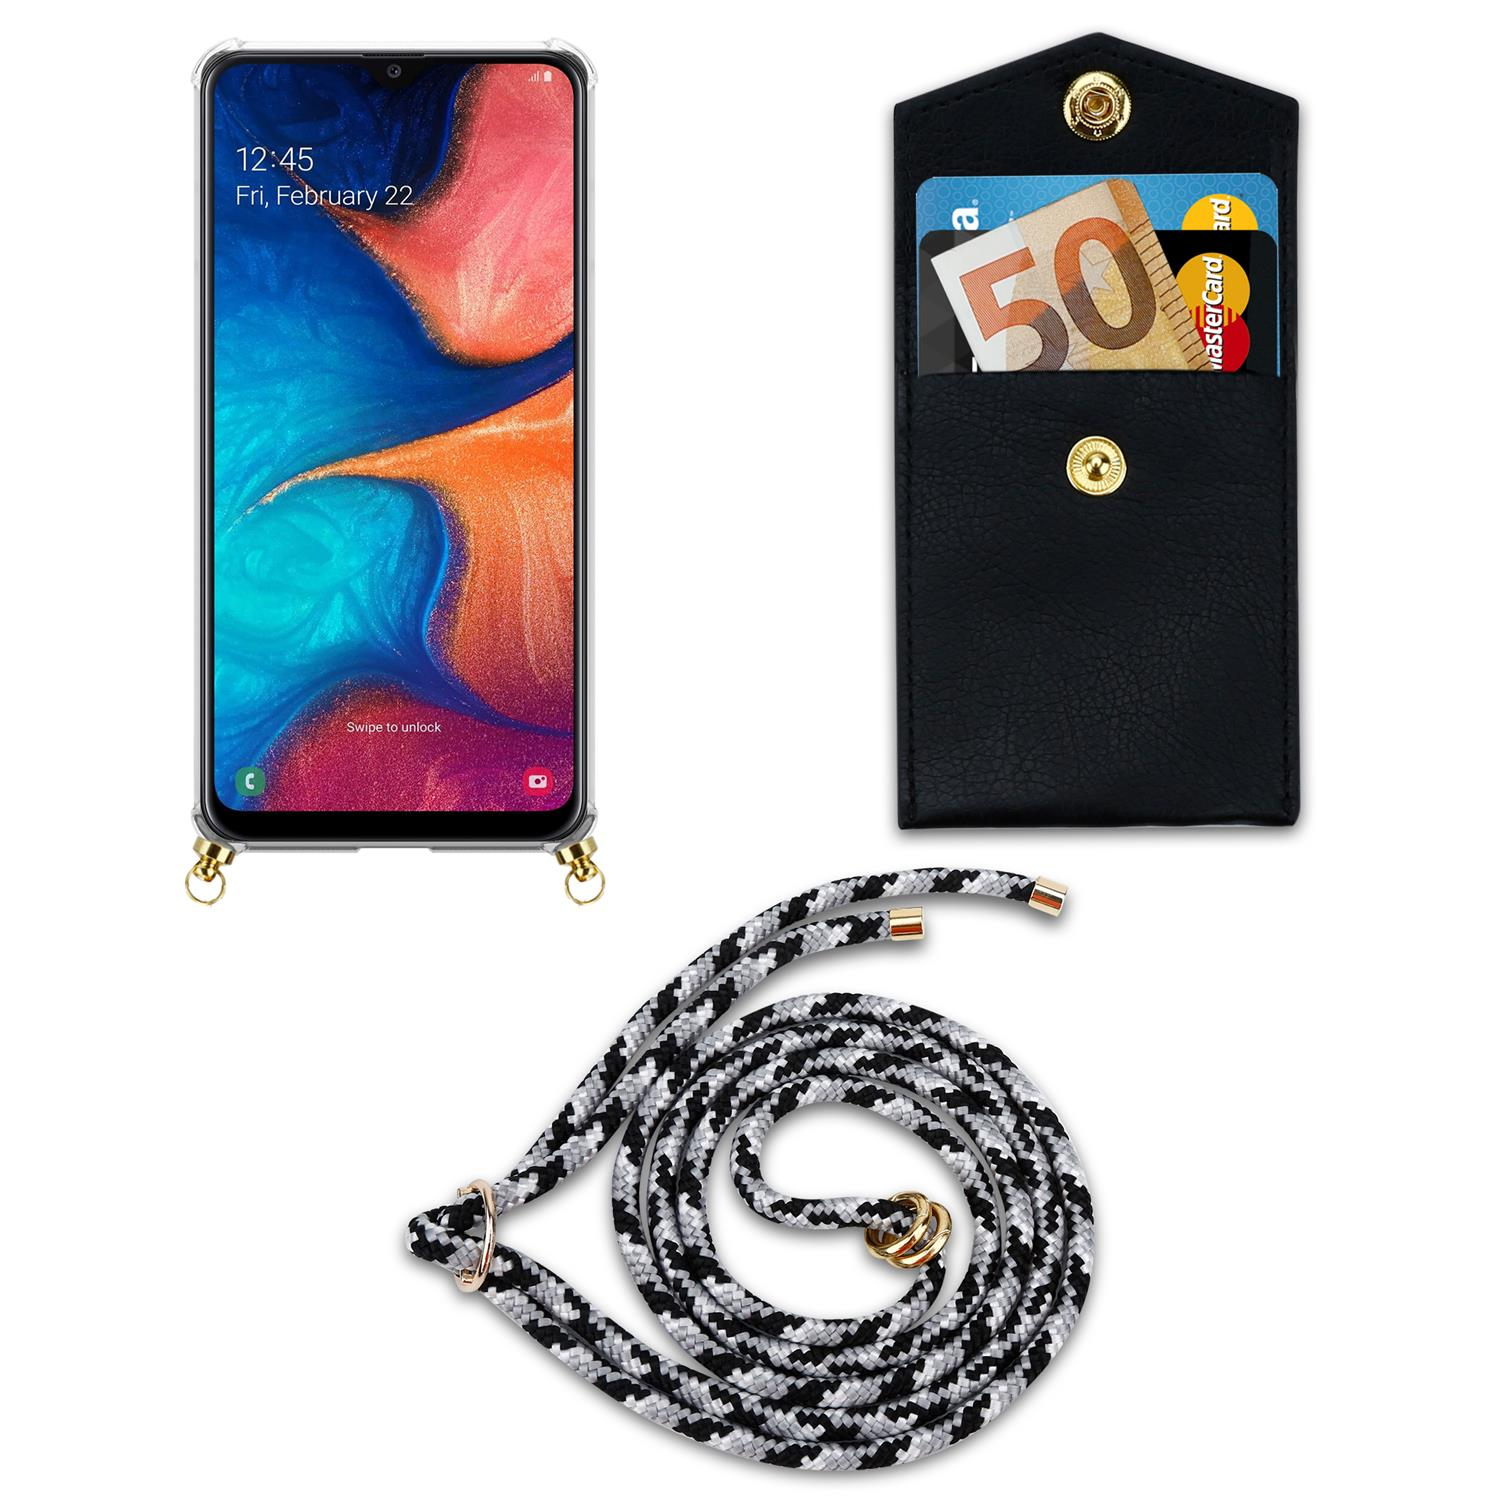 CADORABO Handy Galaxy SCHWARZ Hülle, abnehmbarer / mit Kordel Gold / Samsung, Band und Ringen, Kette M10s, CAMOUFLAGE A30 Backcover, A20